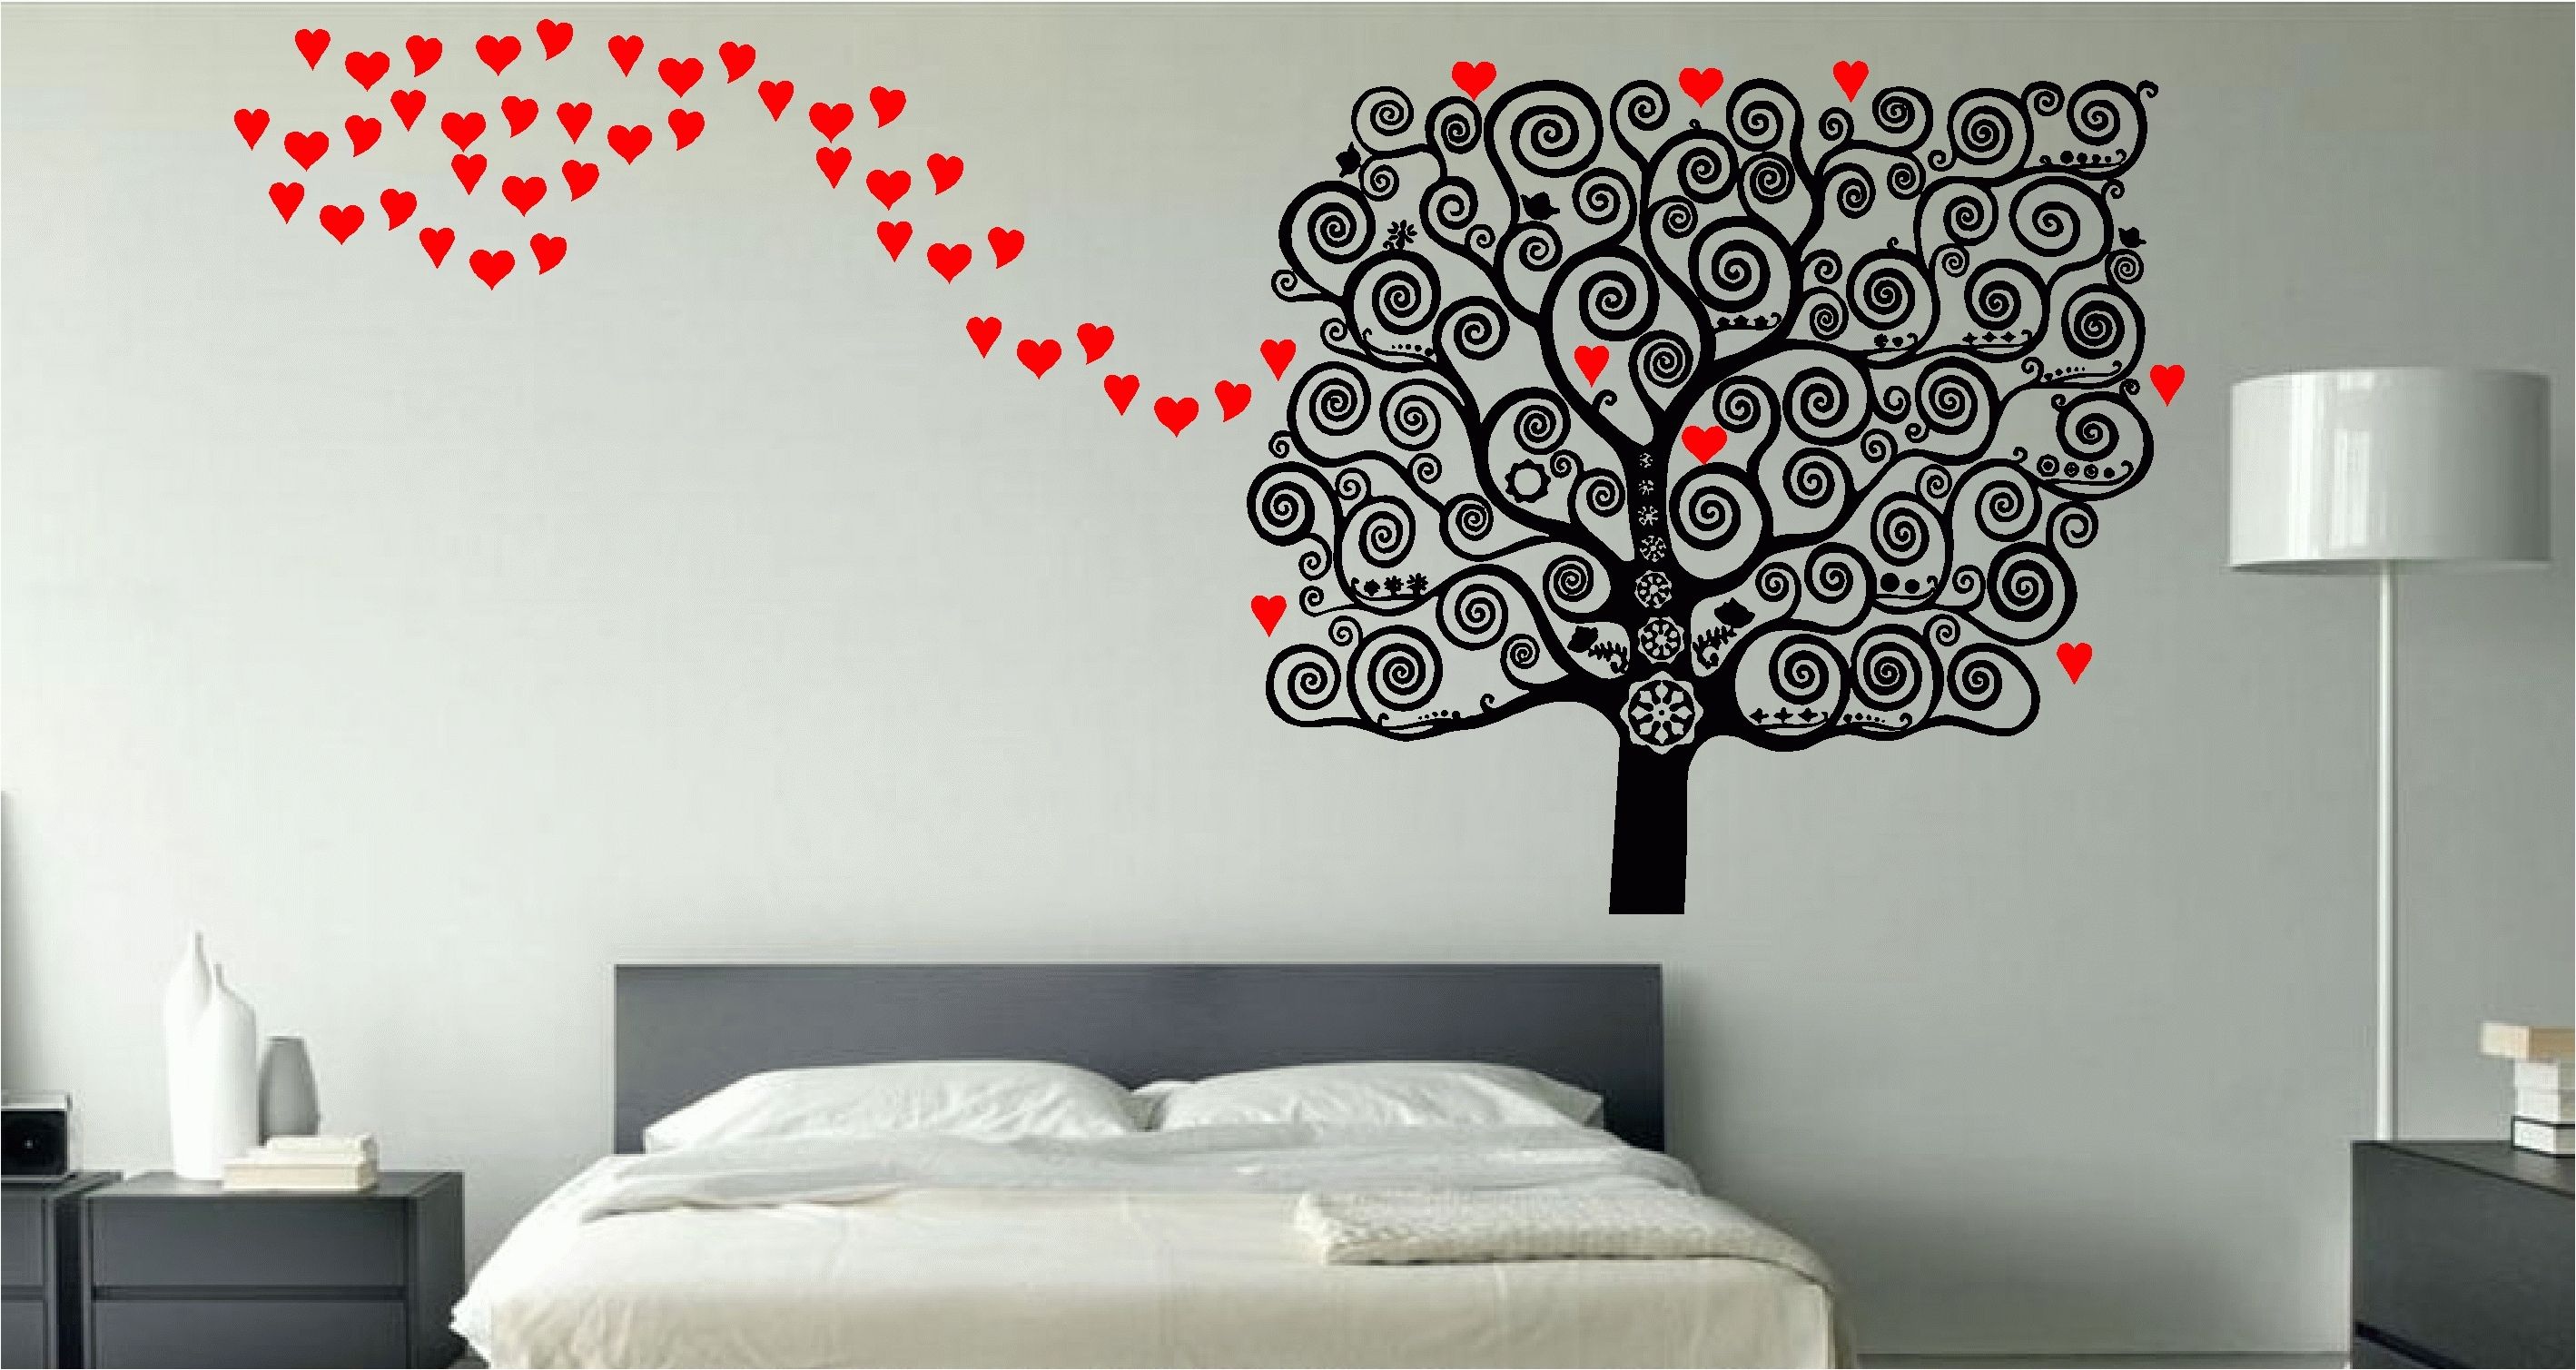 Most Current Wall Art For Bedroom With Regard To Stunning Love Heart Tree Wall Art Sticker Decal Bedroom Kitchen (View 2 of 15)